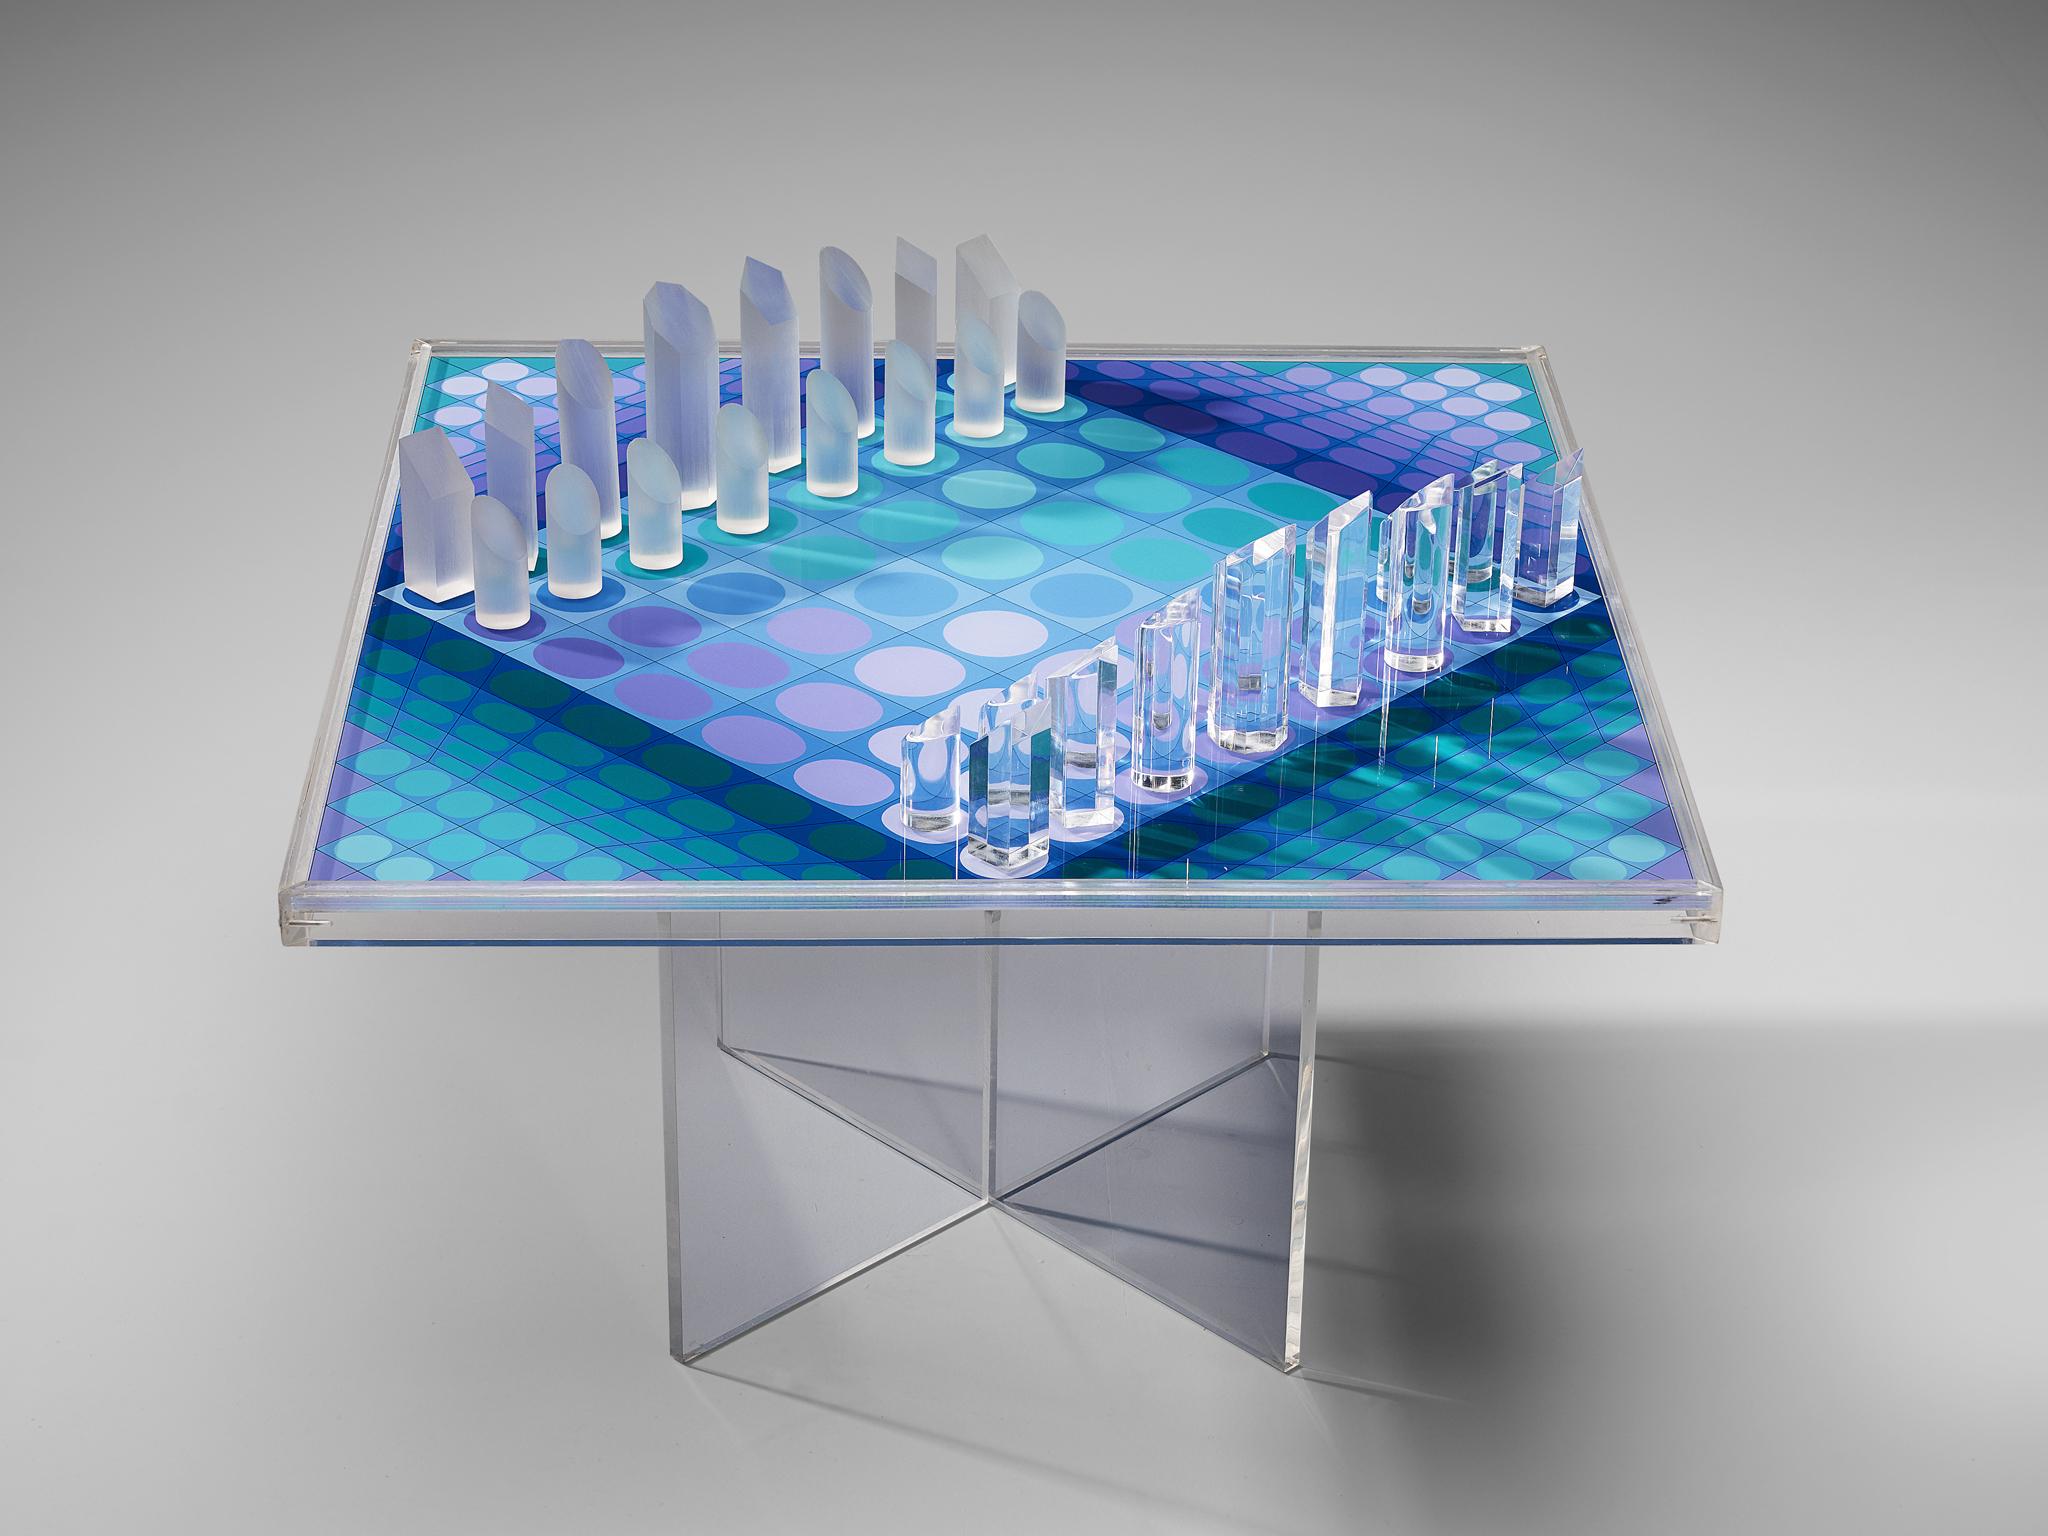 Victor Vasarely, chess set, plexiglass, France, 1979

Victor Vasarely (1906-1997), one of the important artists of the optical art, designed this chess set in 1979. On a cross-legged plexiglass base rests the squared chess board with 32 pieces. A